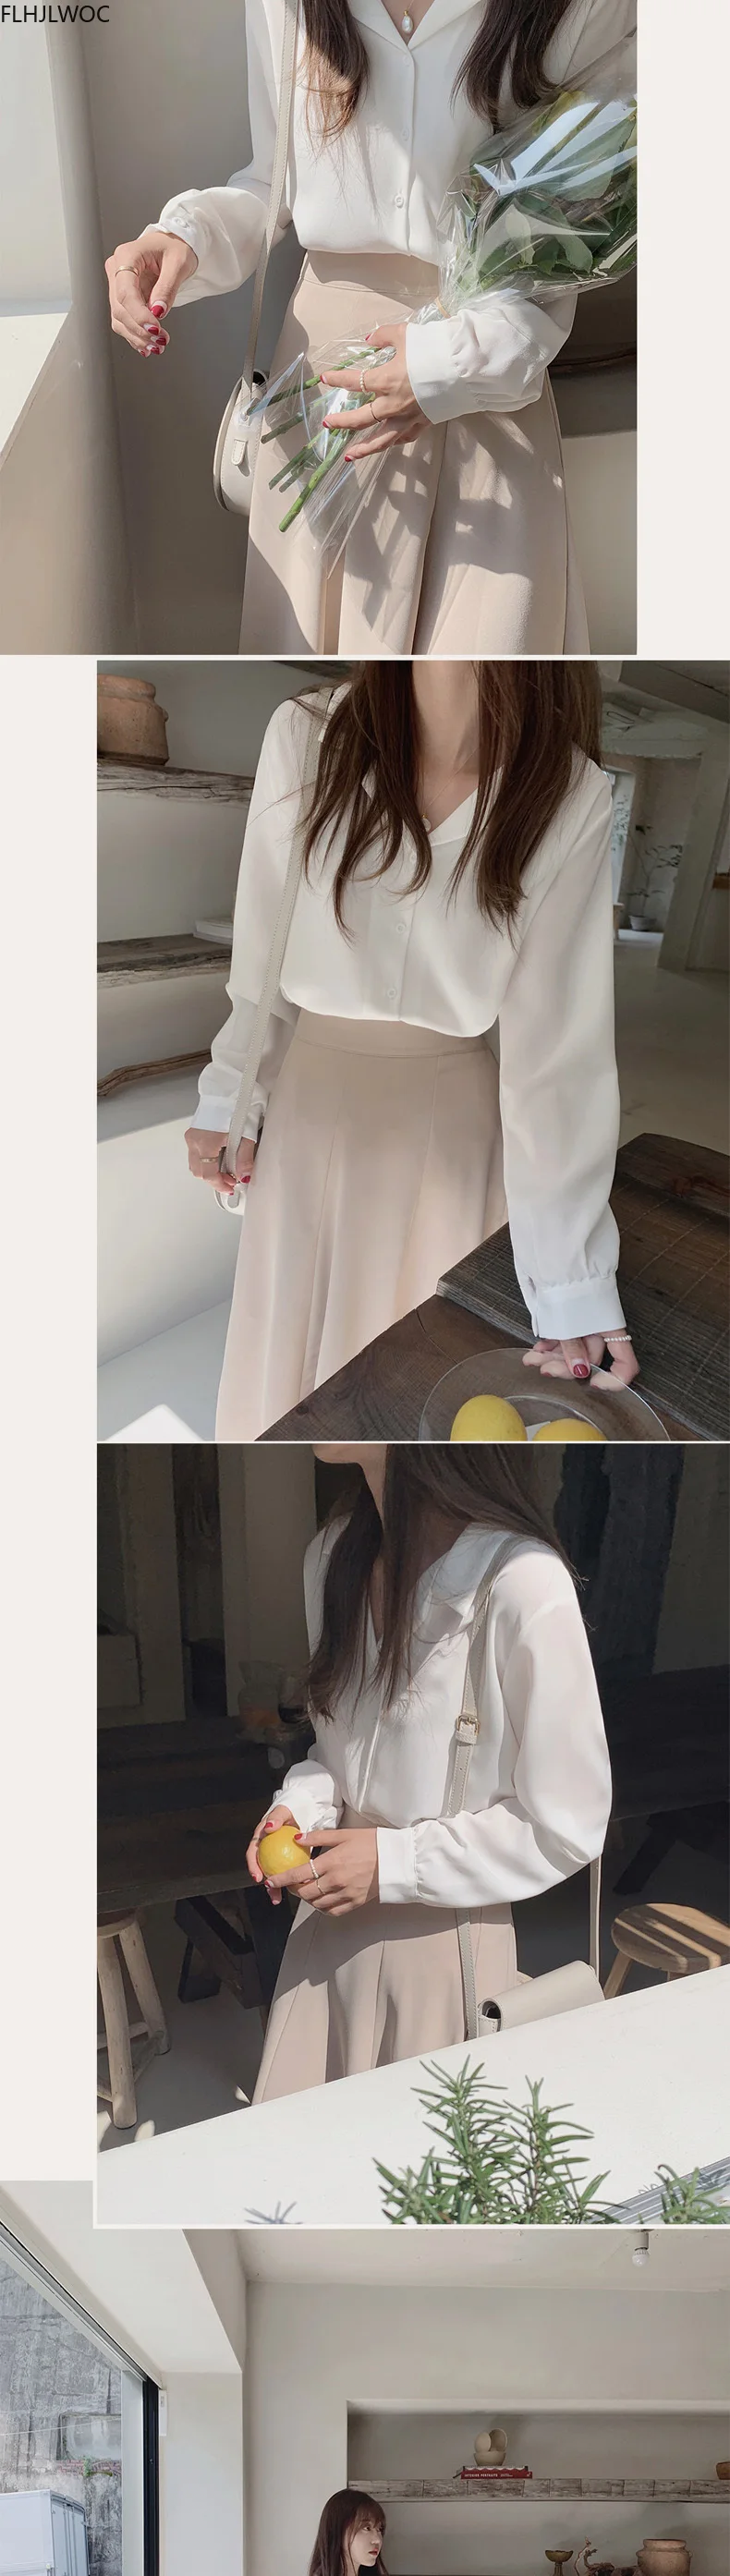 cute blouses White Shirts Long Sleeve Single Breasted Button Elegant Office Lady V Neck Work Blouse Women Chic  Korea Top 7301 sexy blouses for women